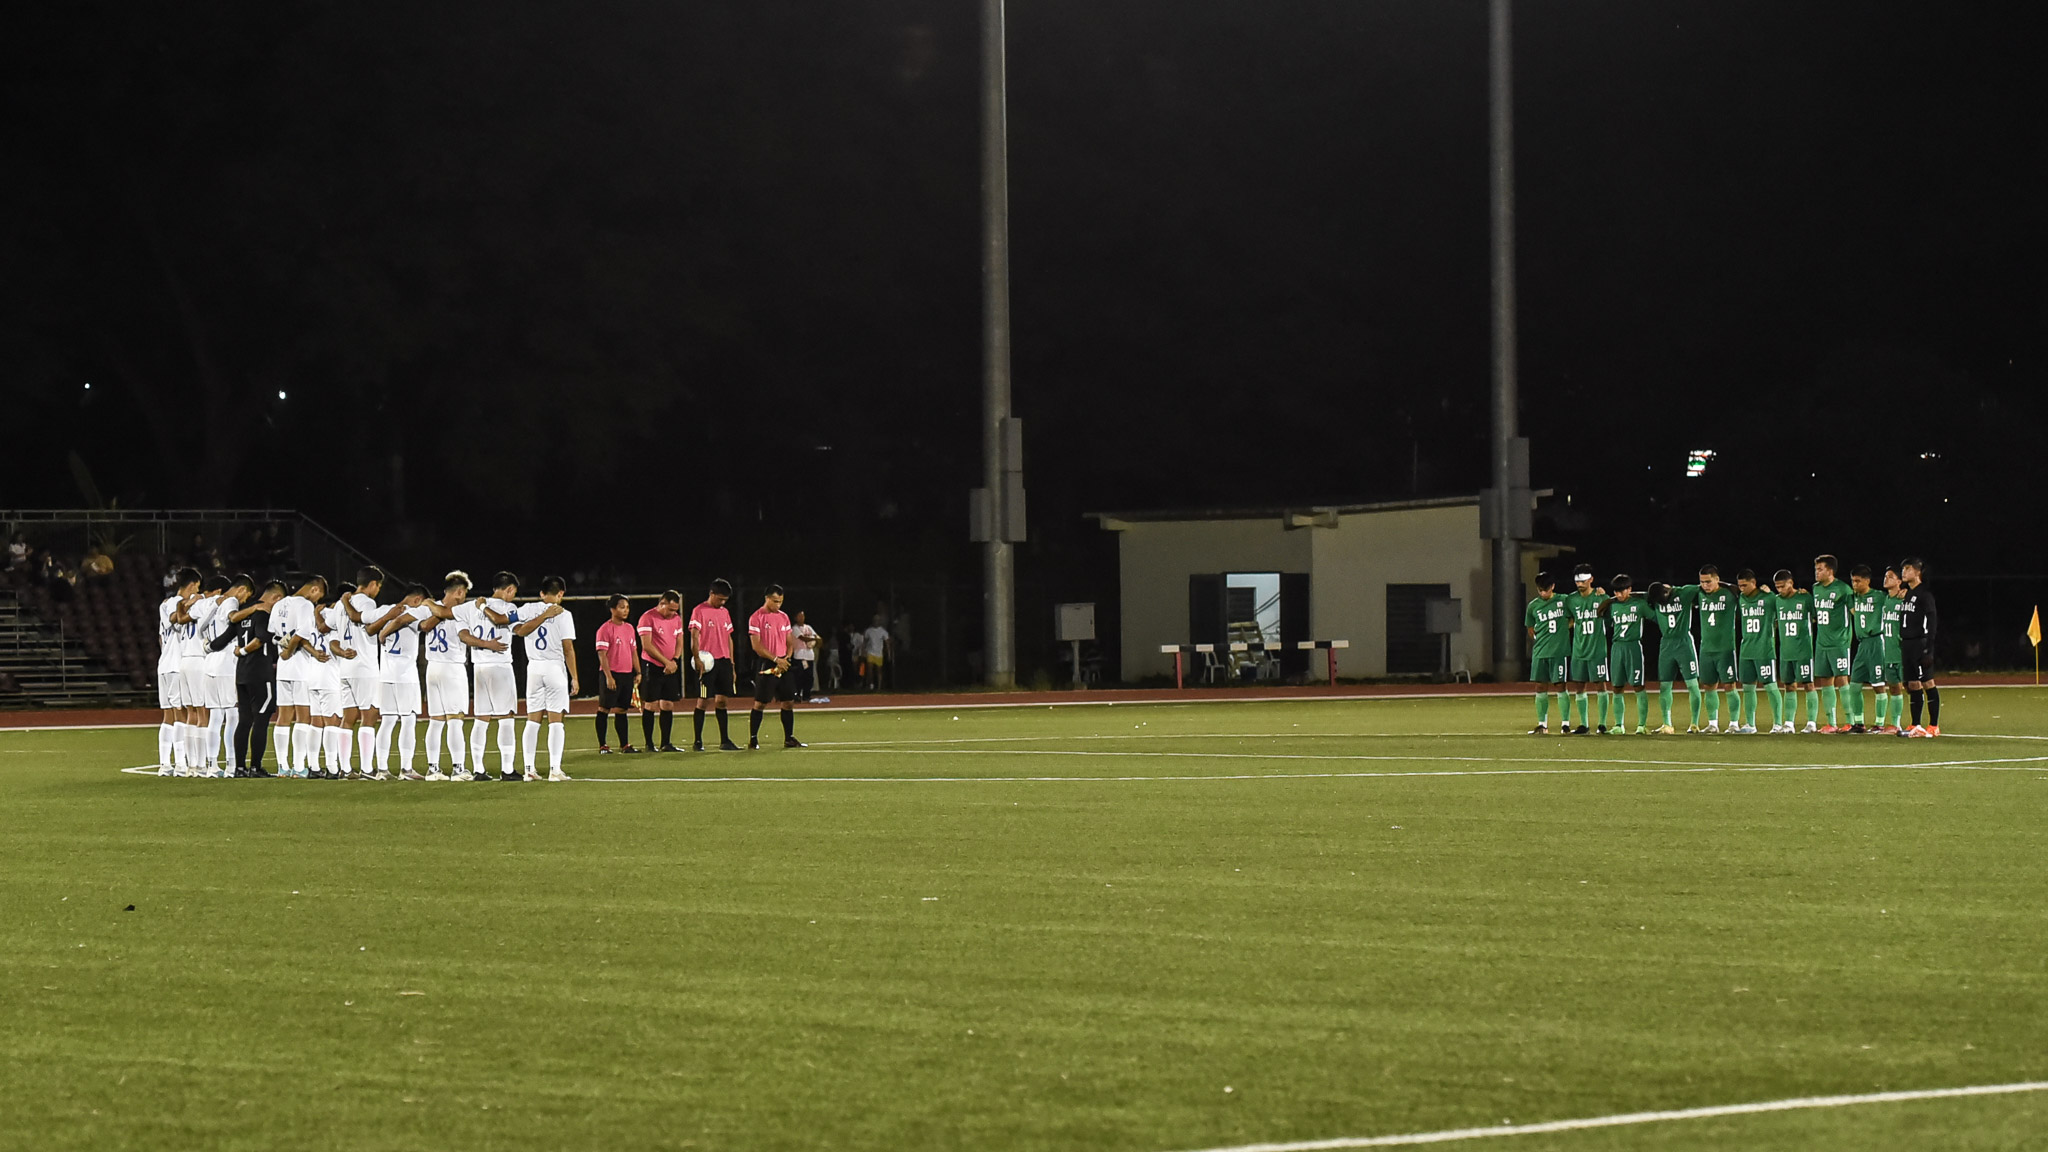 DLSU and ADMU also paid their respects to the passing of Sangare before kick-off. 